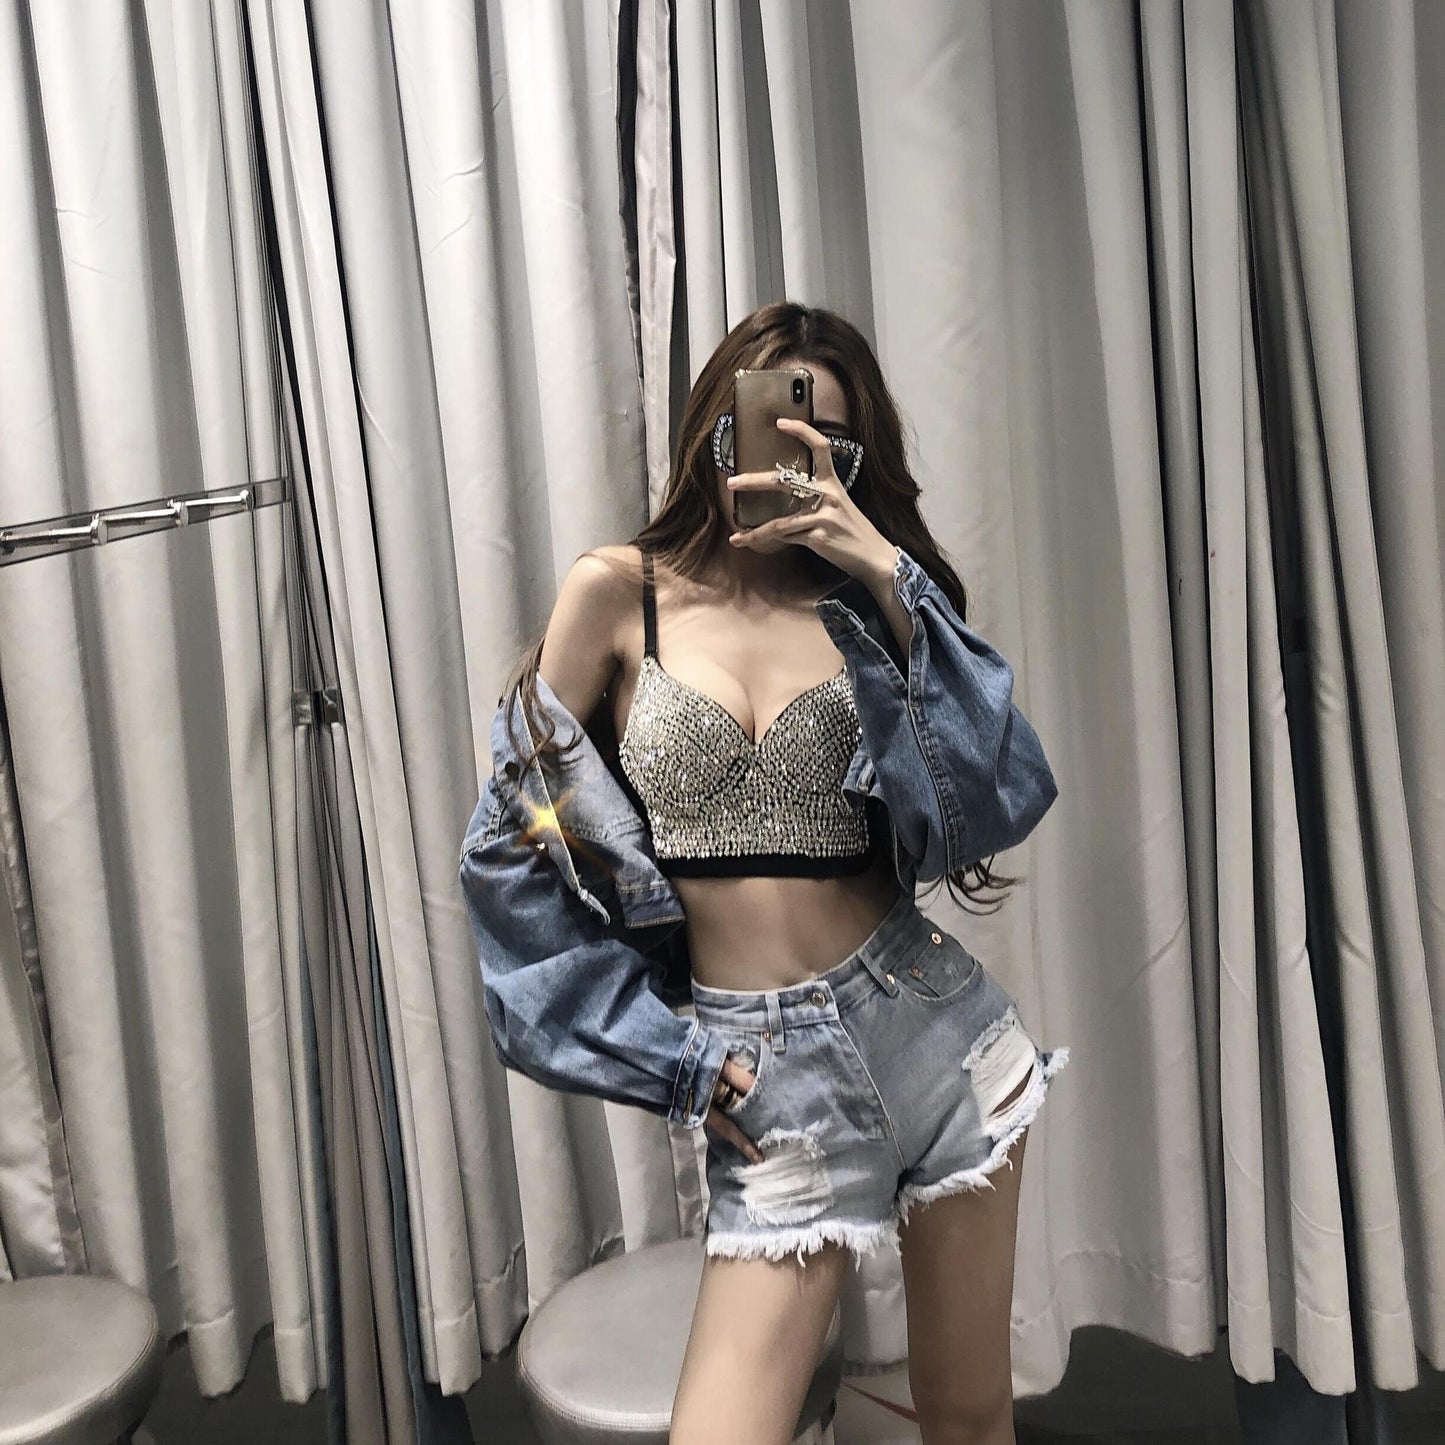 A woman stands in front of a mirror taking a selfie. She is wearing a Gypsophila shining studded waistcoat strapless tube top strap by Maramalive™, a denim jacket, and distressed denim shorts. Her long hair cascades over her shoulders as she holds a phone with her left hand, perfectly capturing the effortless style of her trendy ensemble.